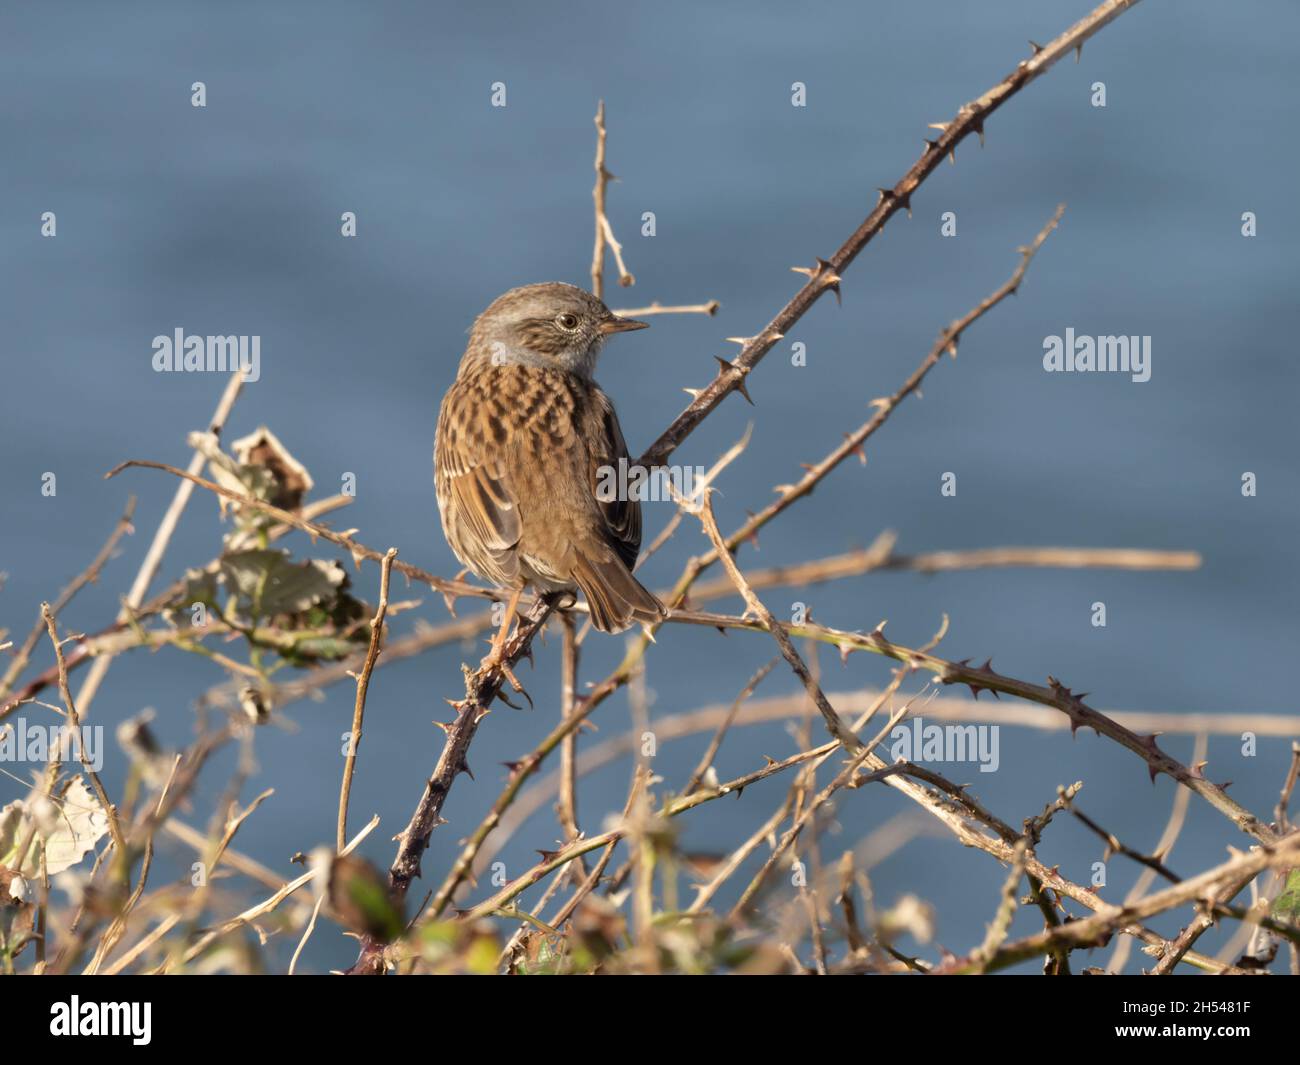 Prunella modularis, a dunnock, also known as hedge accentor, hedge sparrow, or hedge warbler, perched on a bramble bush overlooking the sea. Stock Photo